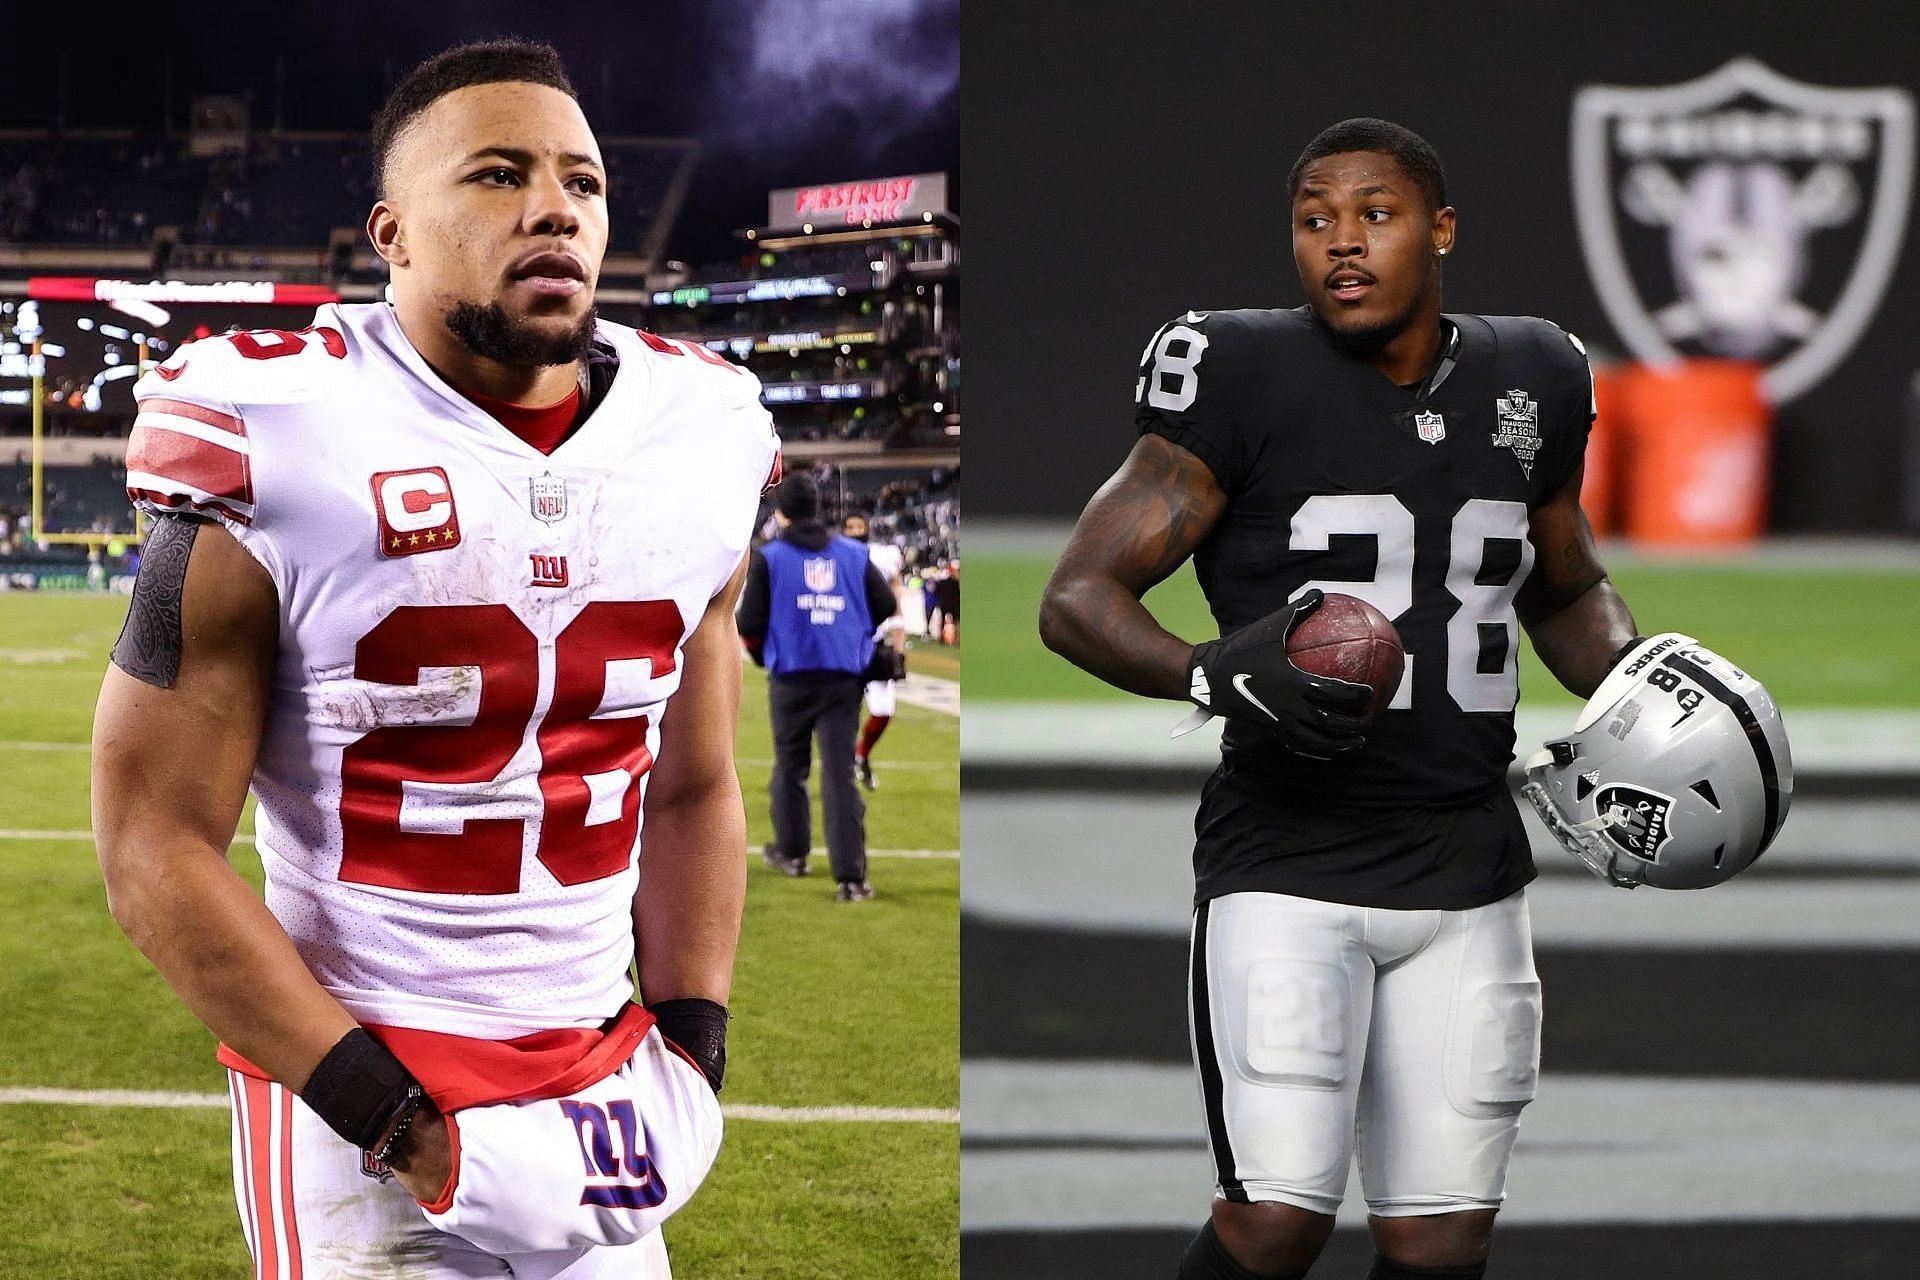 NFL Analyst hints at collusion as Saquon Barkley, Josh Jacobs miss out on extension